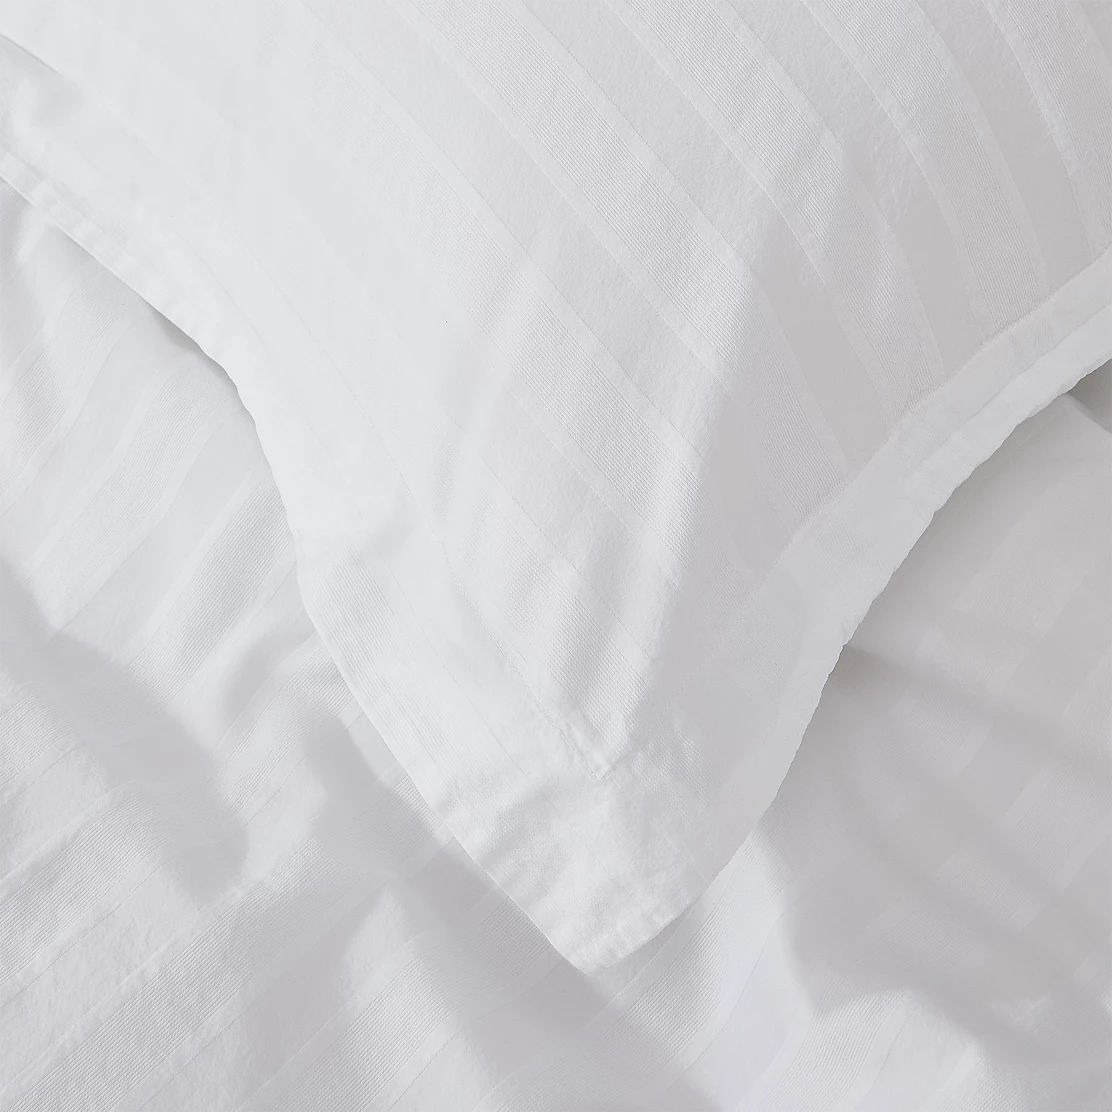 Malmo Washed Sateen Stripe Bed Linen Collection
    
            
    
    
    
    
    
    
 ... | The White Company (UK)